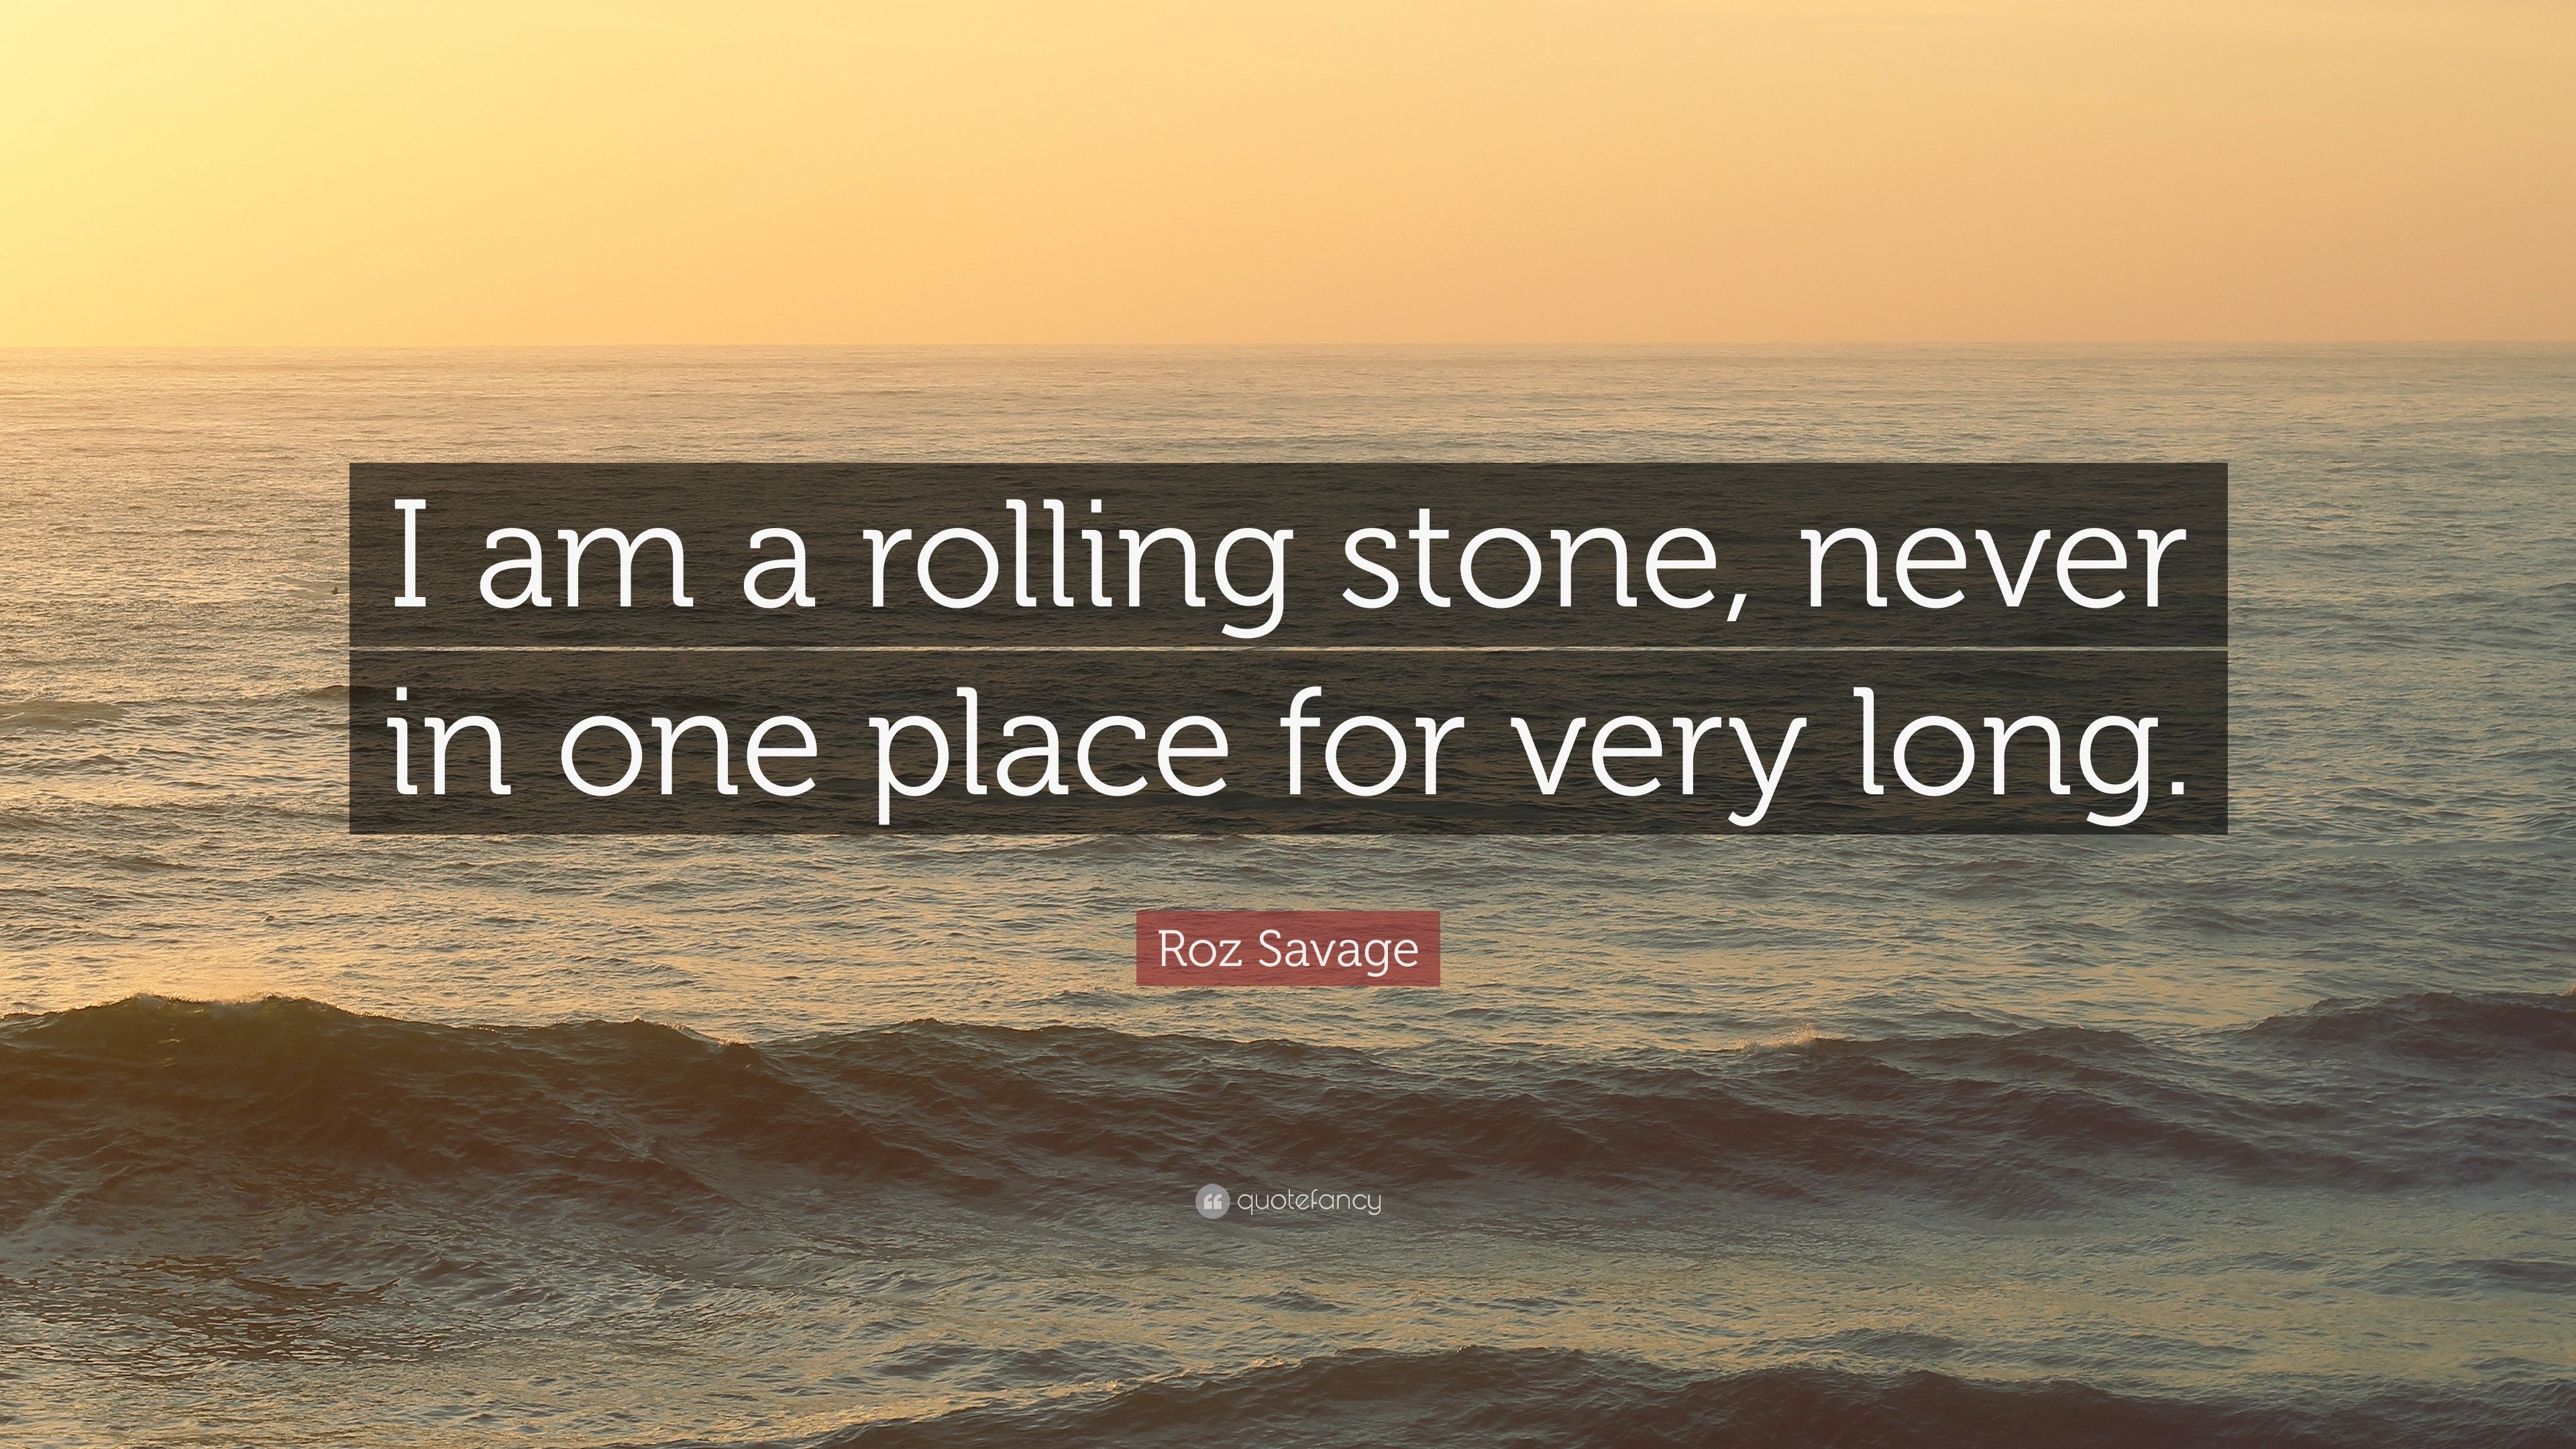 7 Quotes About The Rolling Stones